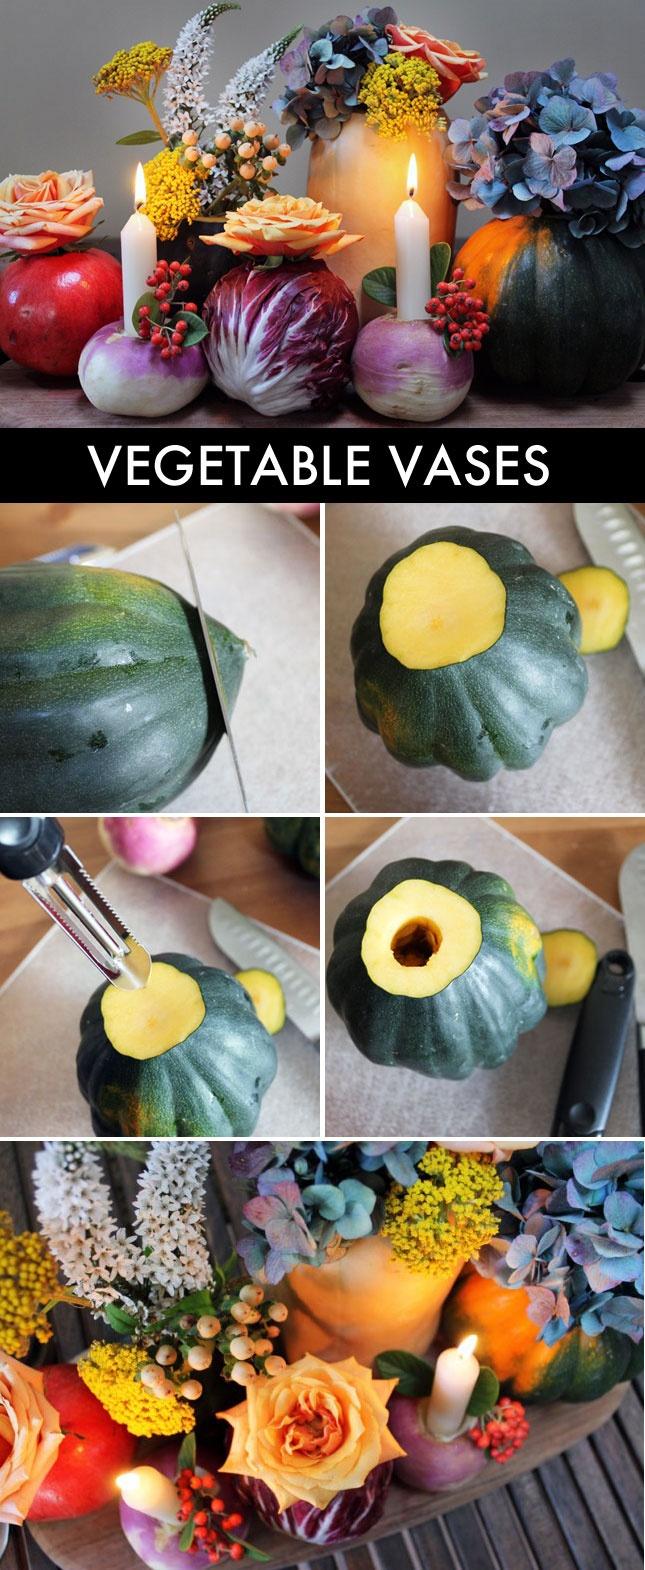 Wedding - How To Turn Vegetables Into Vases